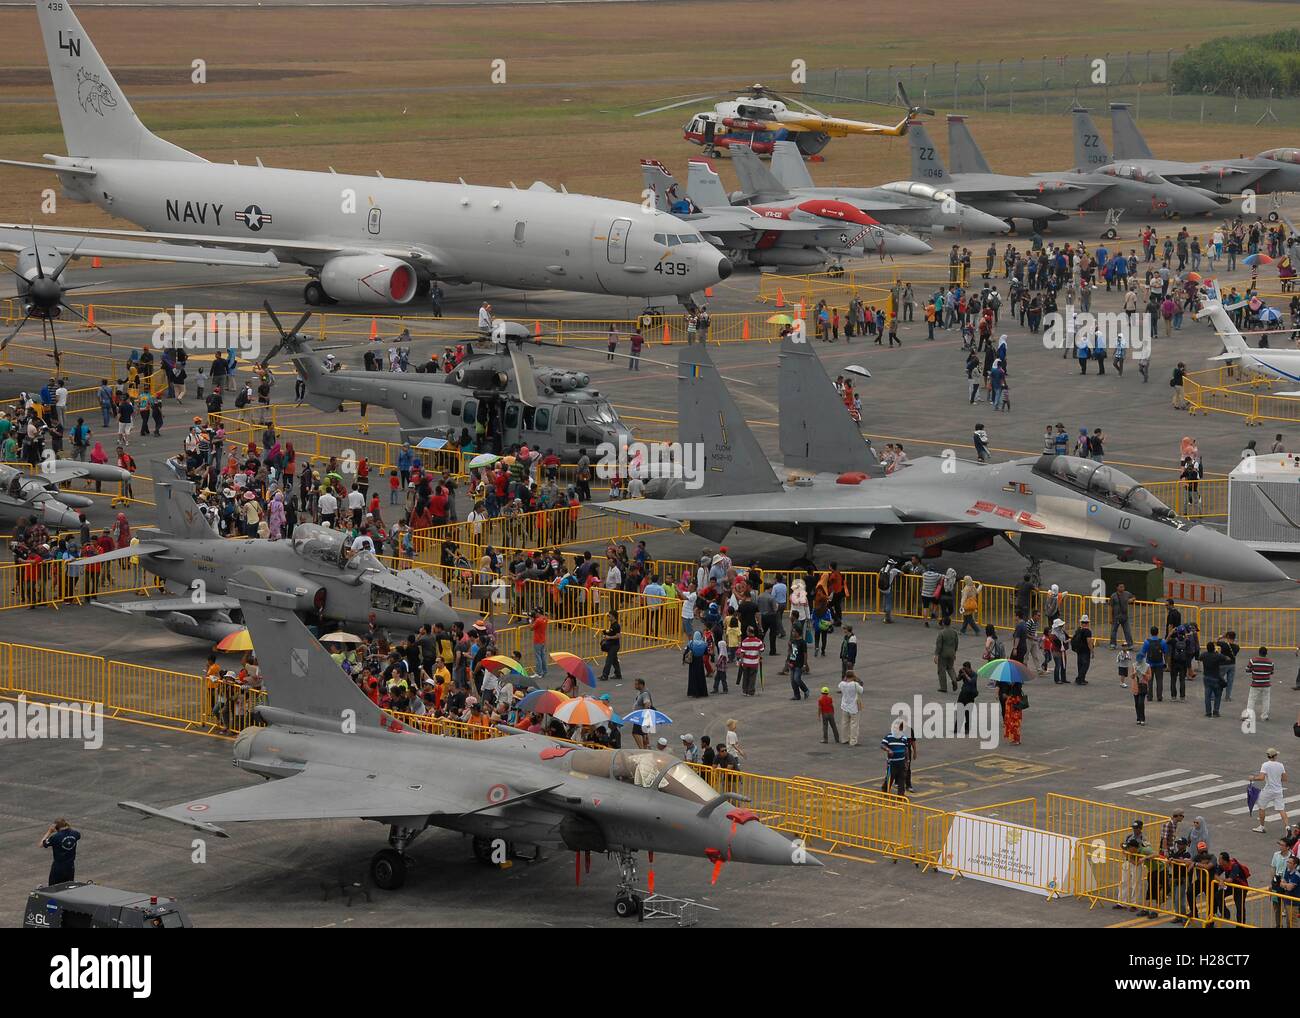 Crowds gather to view U.S. military aircraft at the Langkawi International Maritime and Aerospace Exhibition March 21, 2015 in Langkawi, Malaysia. Stock Photo